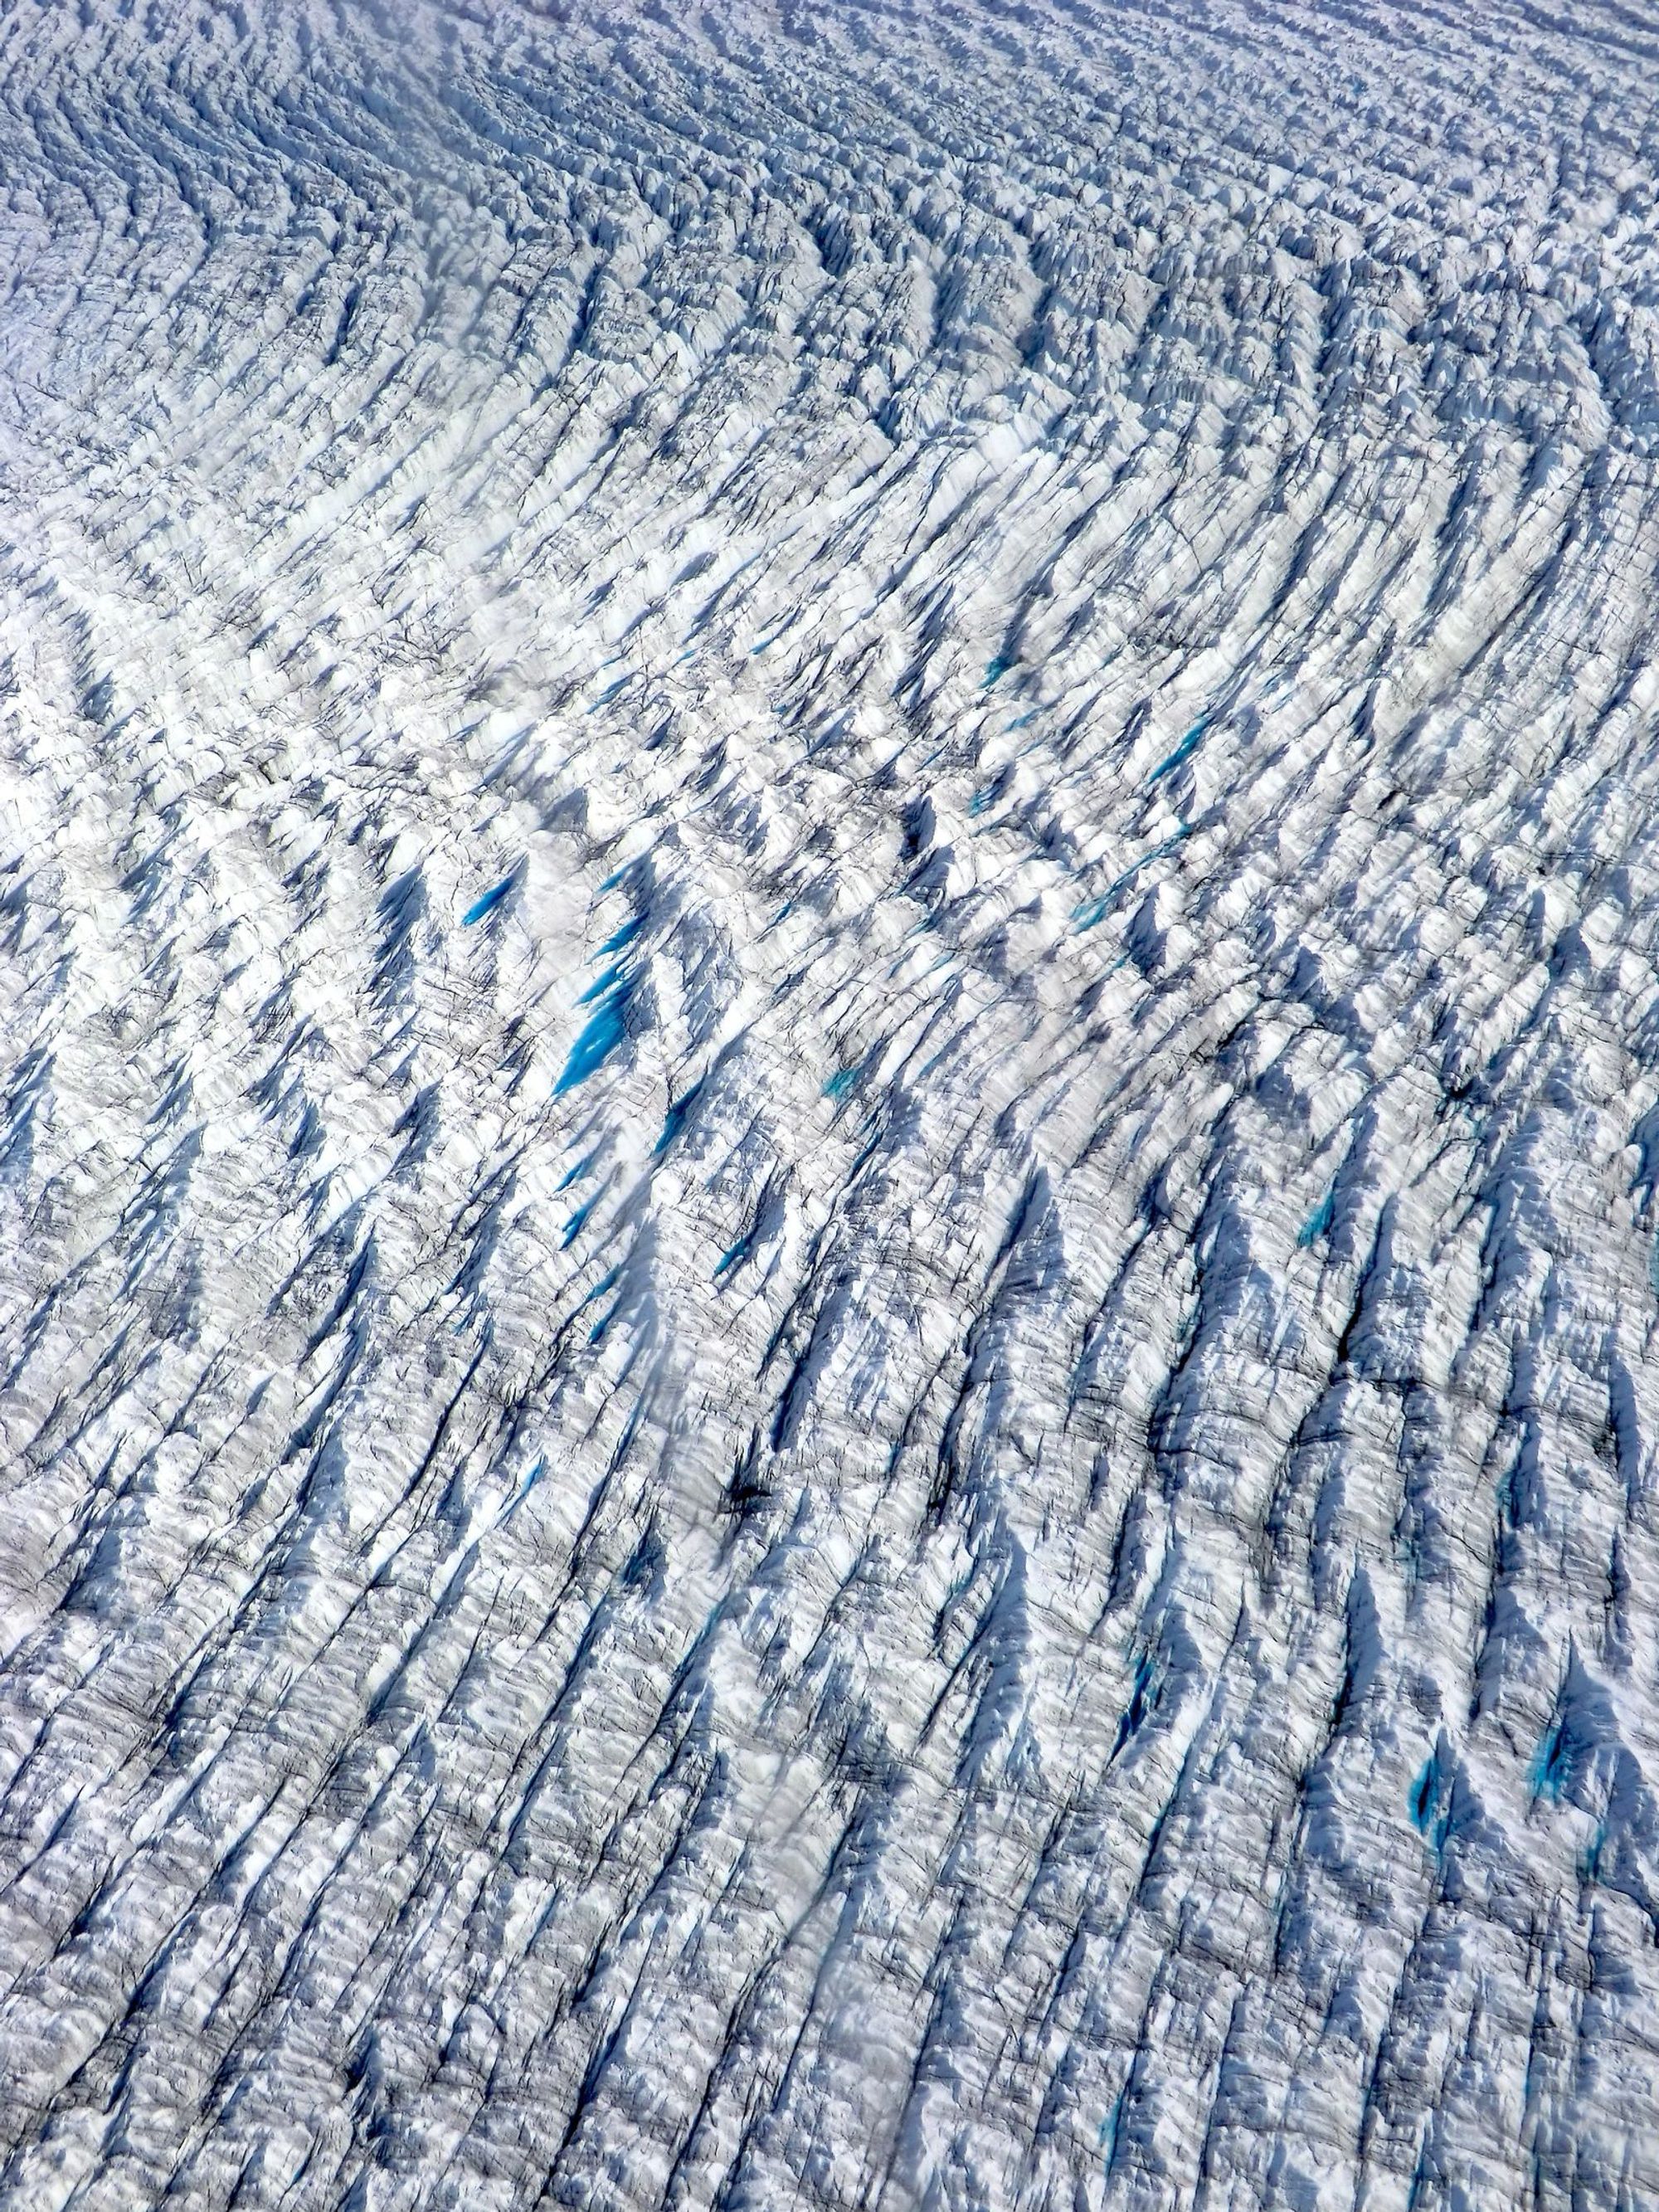 Photo of ice in Greenland.